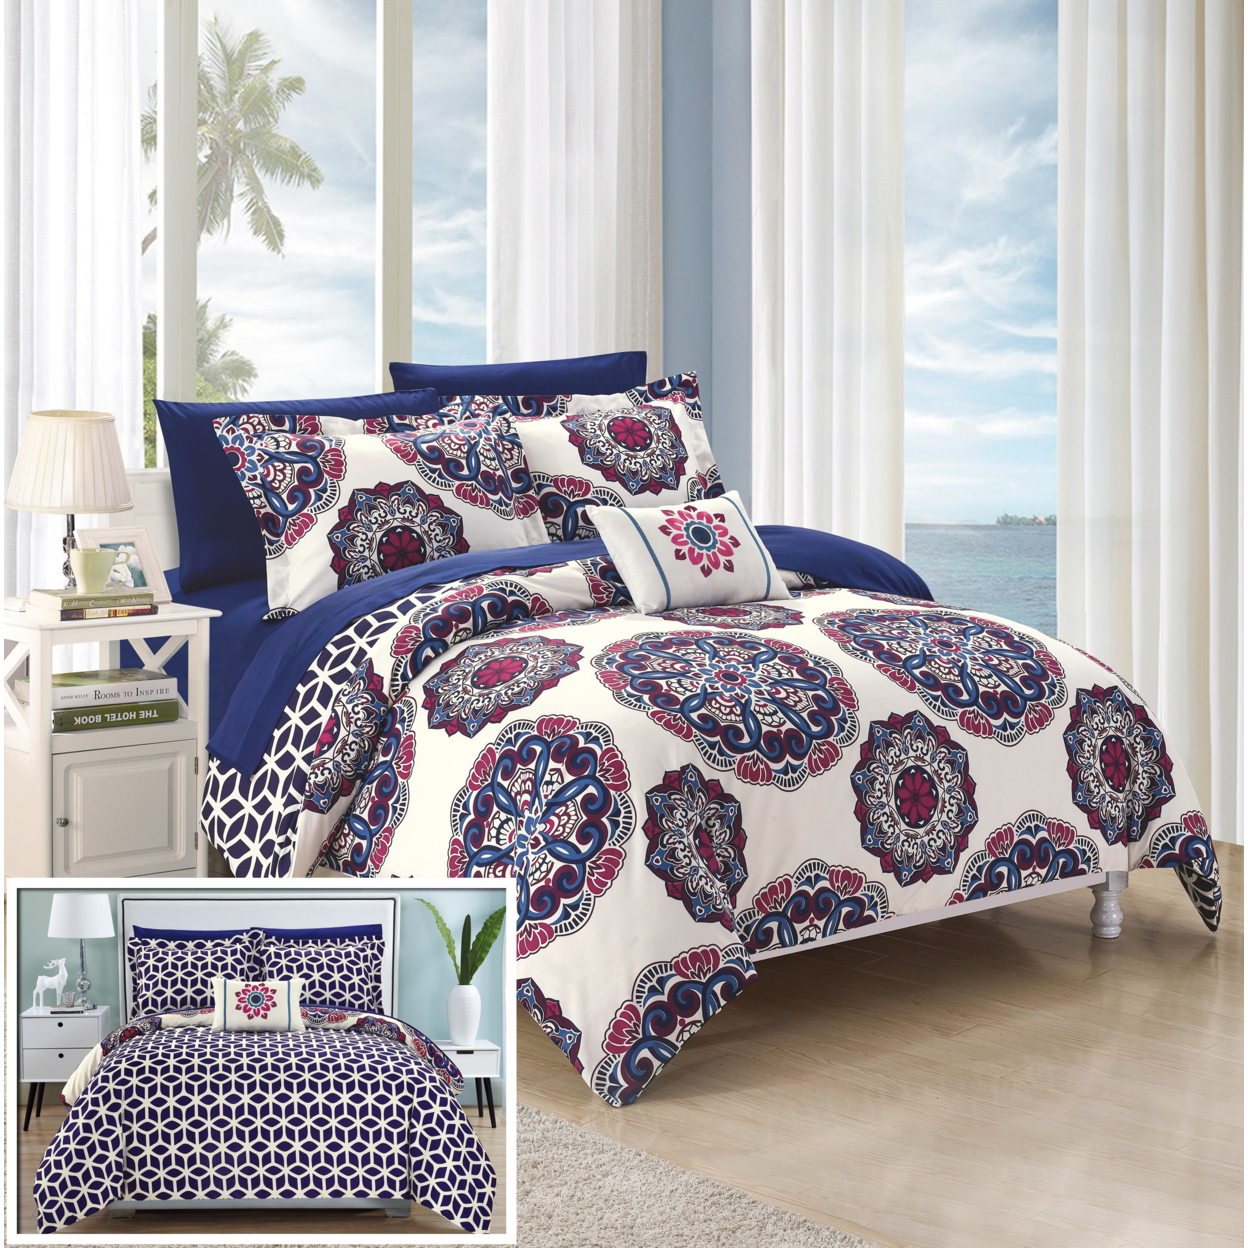 8 Or 6 Pc. Barella Super Soft Large Printed Medallion REVERSIBLE With Geometric Printed Backing Comforter Set - Blue, Queen